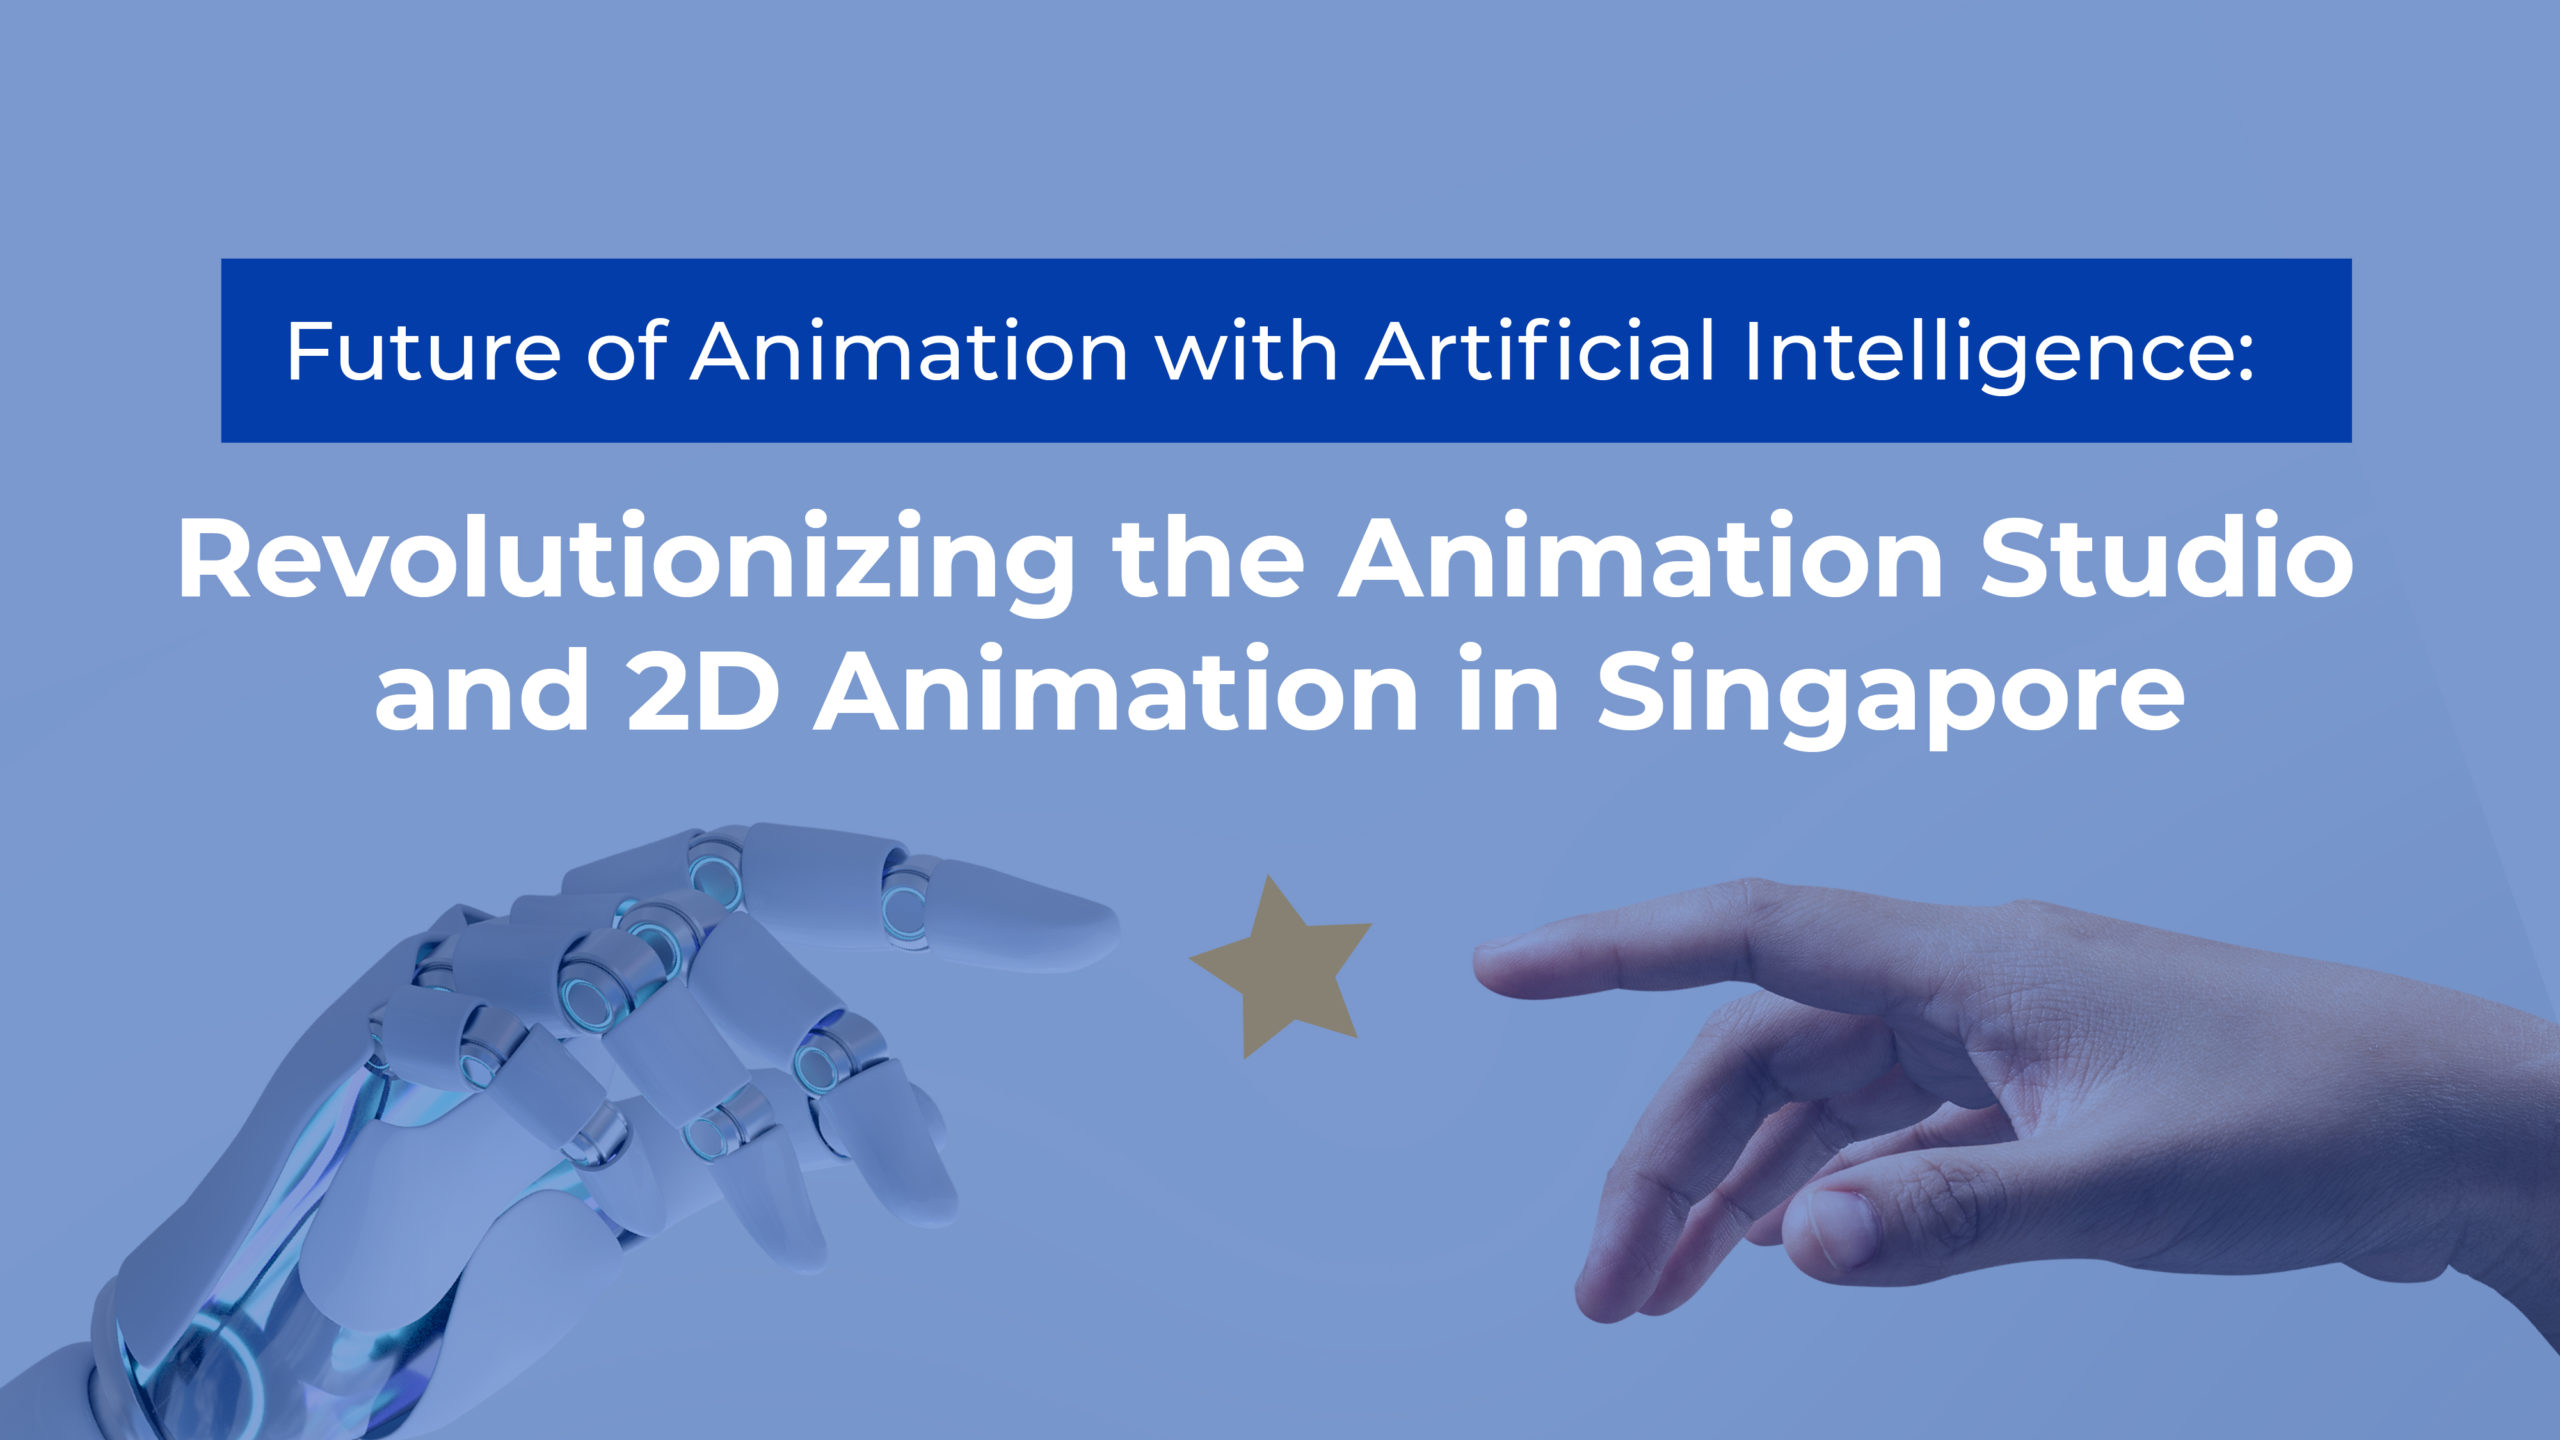 Future of Animation with AI Revolutionizing Animation Studio and 2D Animation in Singapore